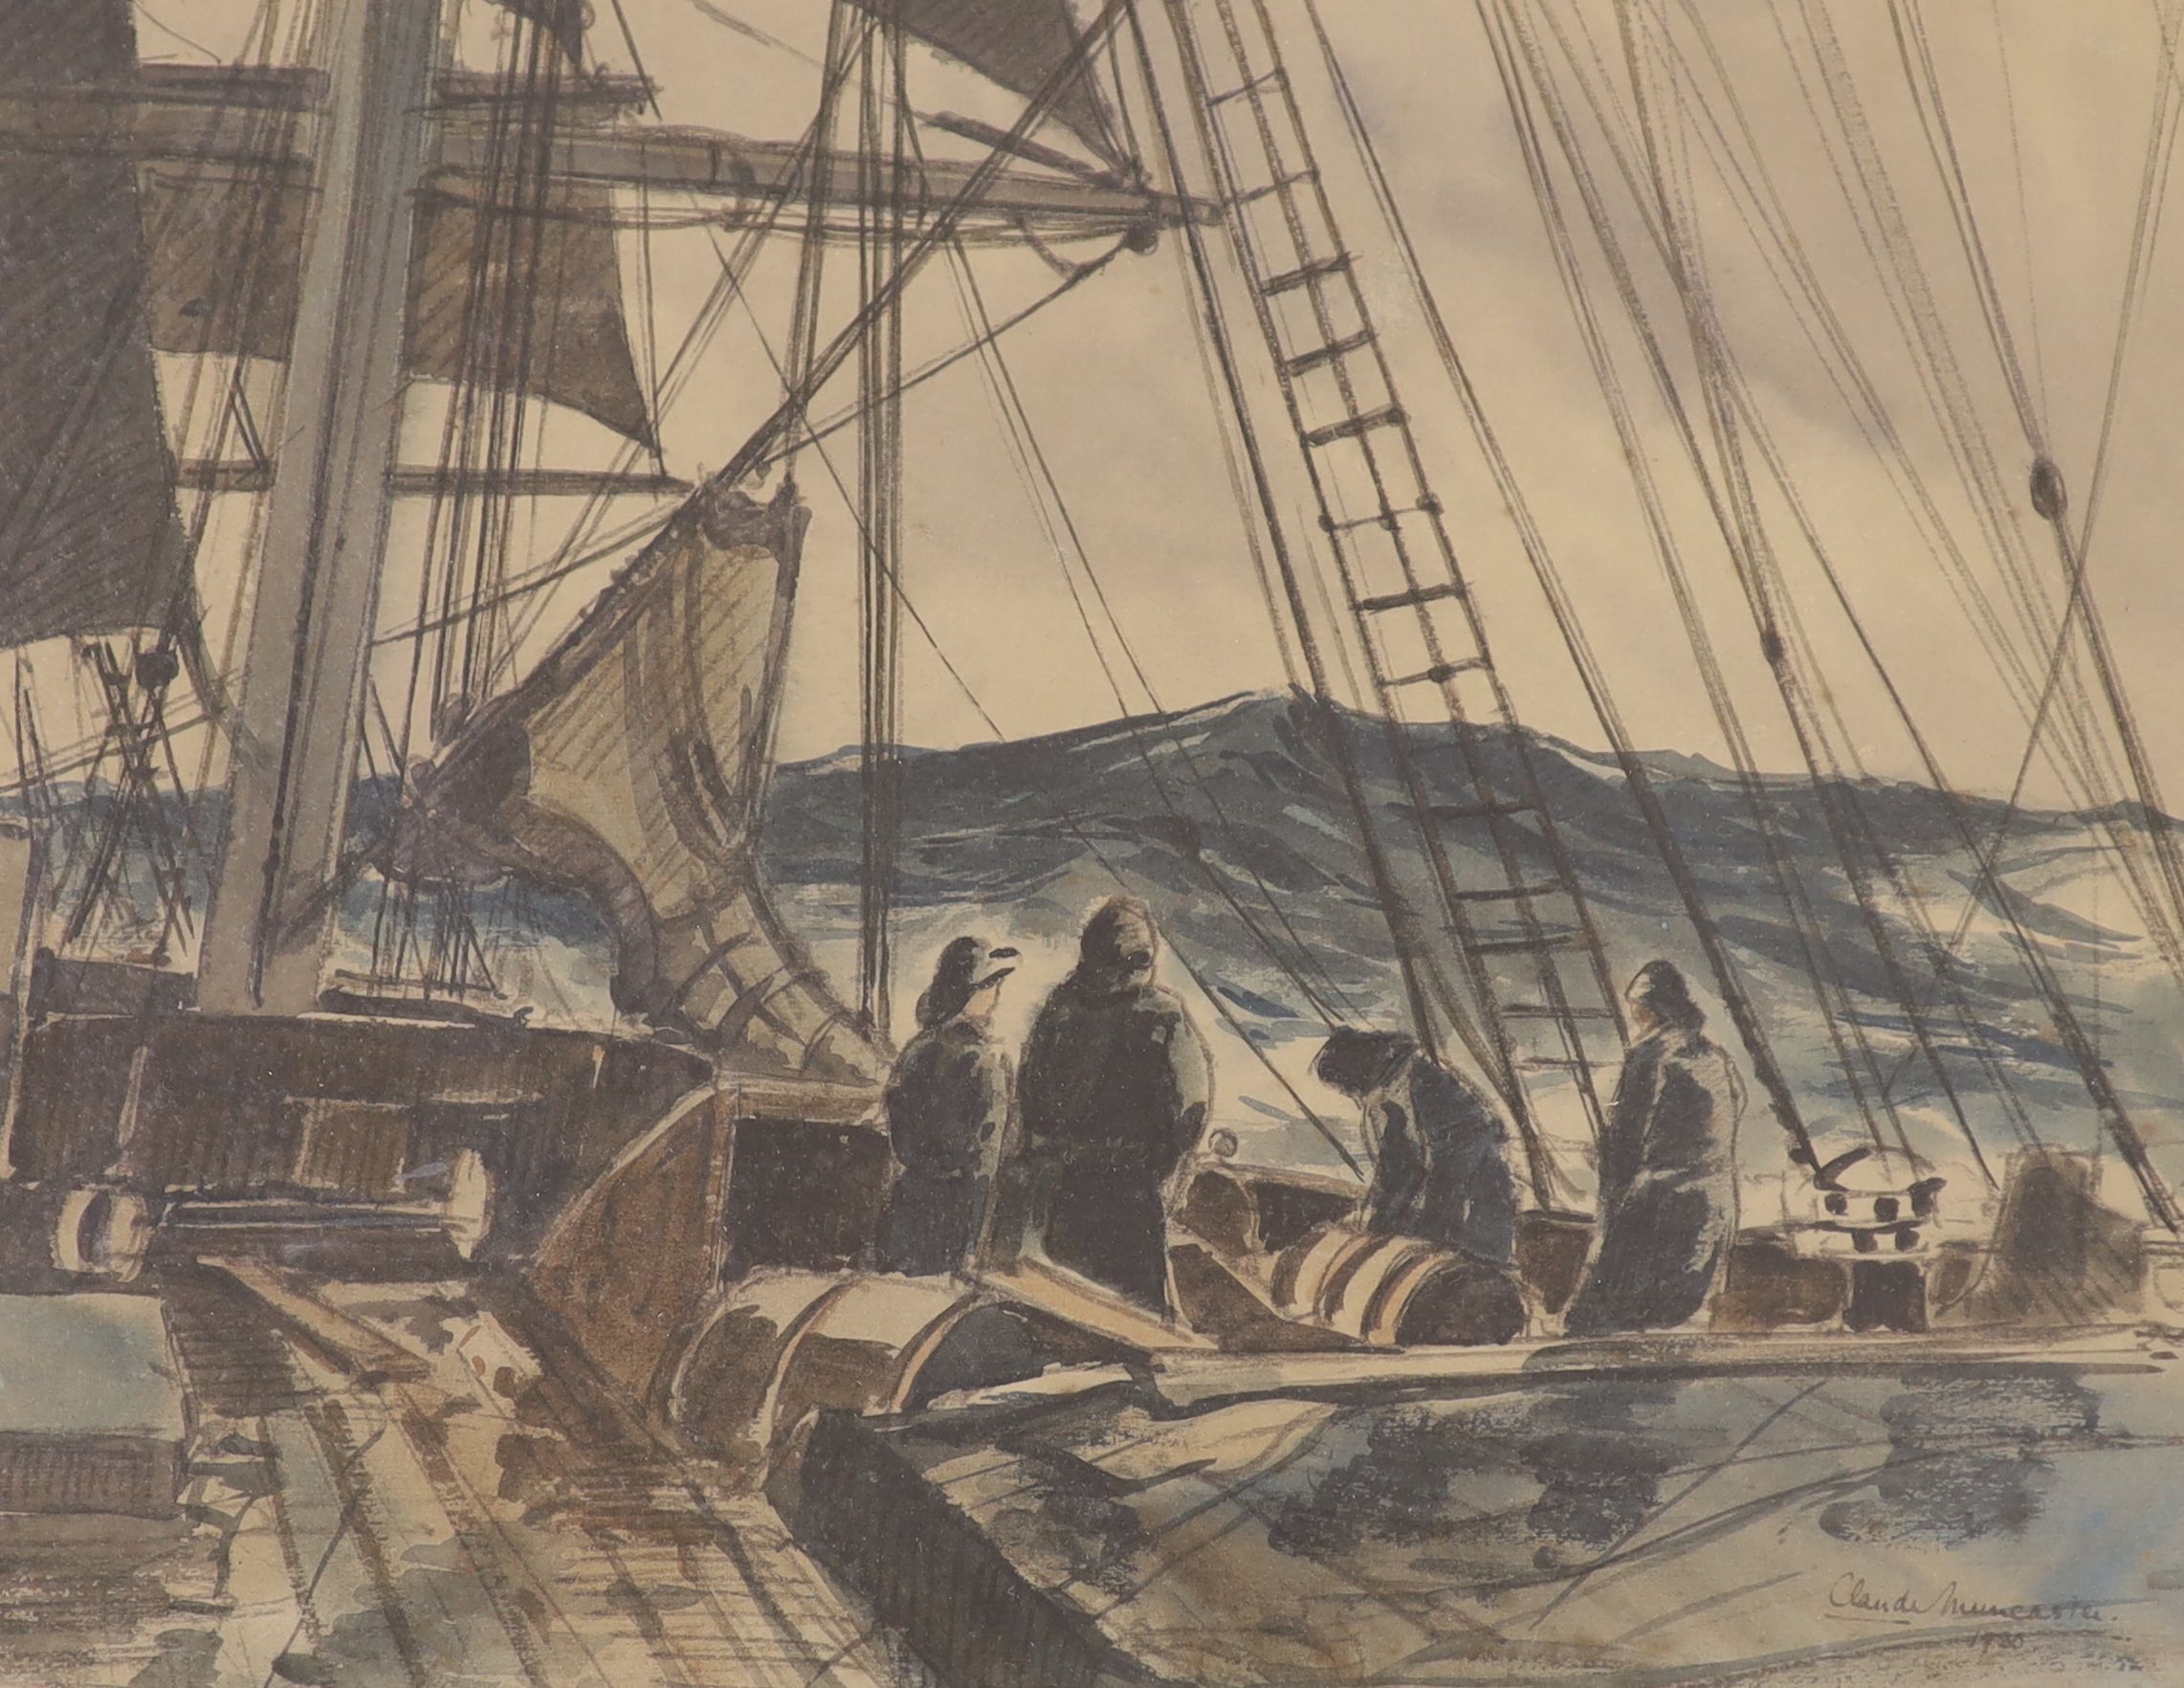 Claude Muncaster (1903-1974), watercolour, Sailors on deck, signed and dated 1930, 25 x 32cm